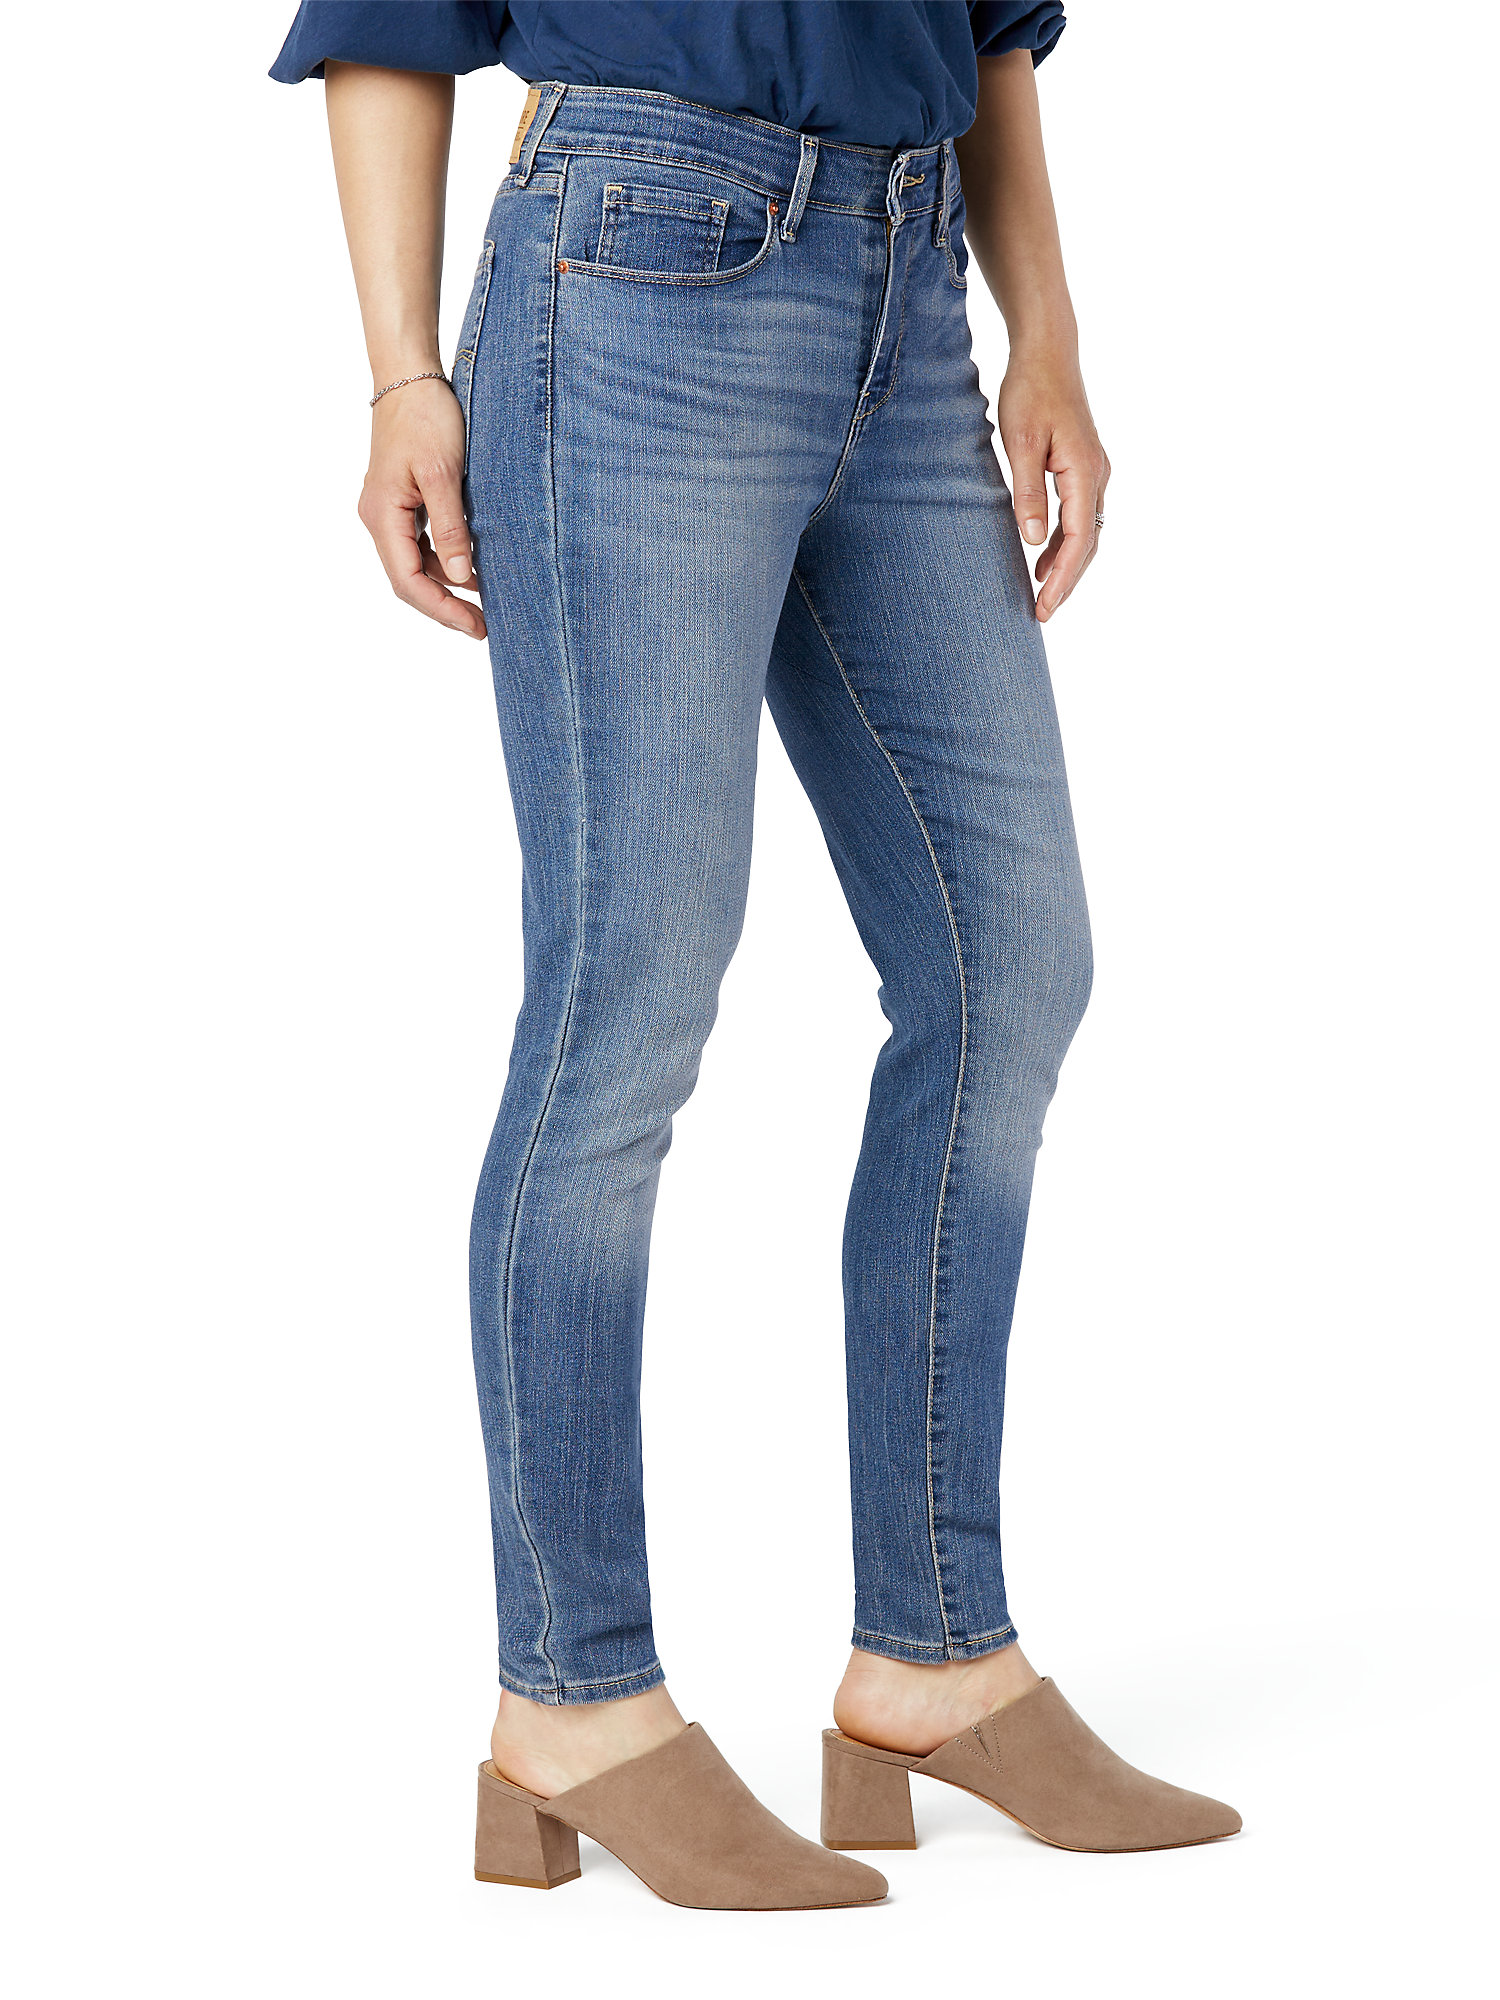 Signature by Levi Strauss & Co. Women's and Women's Plus Mid Rise Skinny Jeans - image 2 of 5